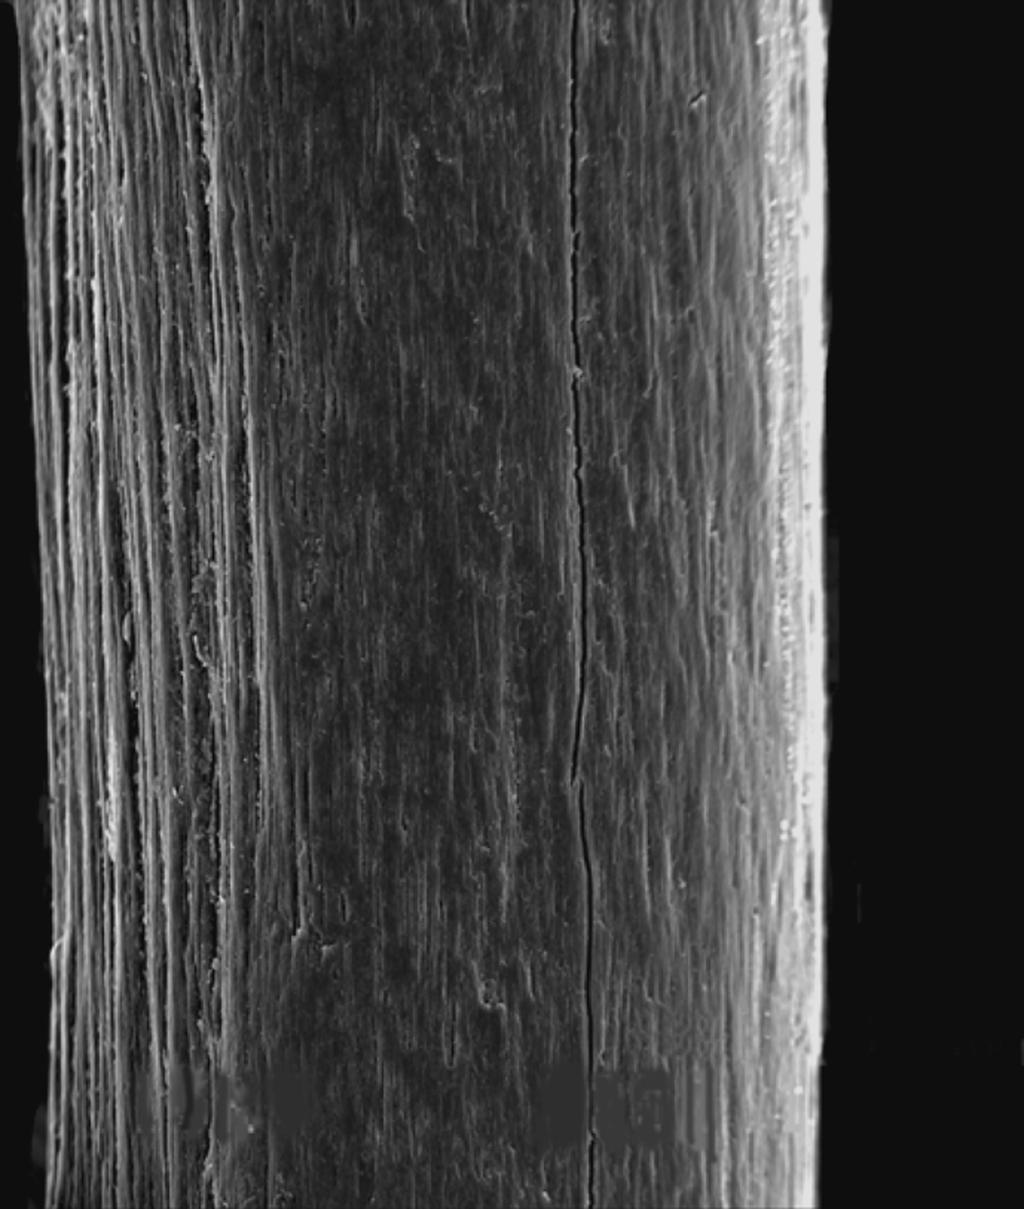 IDENTIFICATION OF HAIRS OF THE WOOLY MAMMOTH 209 Fig. 3. Longitudinal fissures in the damaged core of a Coelodonta antiquitatis guard hair shaft basis with a completely disrupted cuticle.